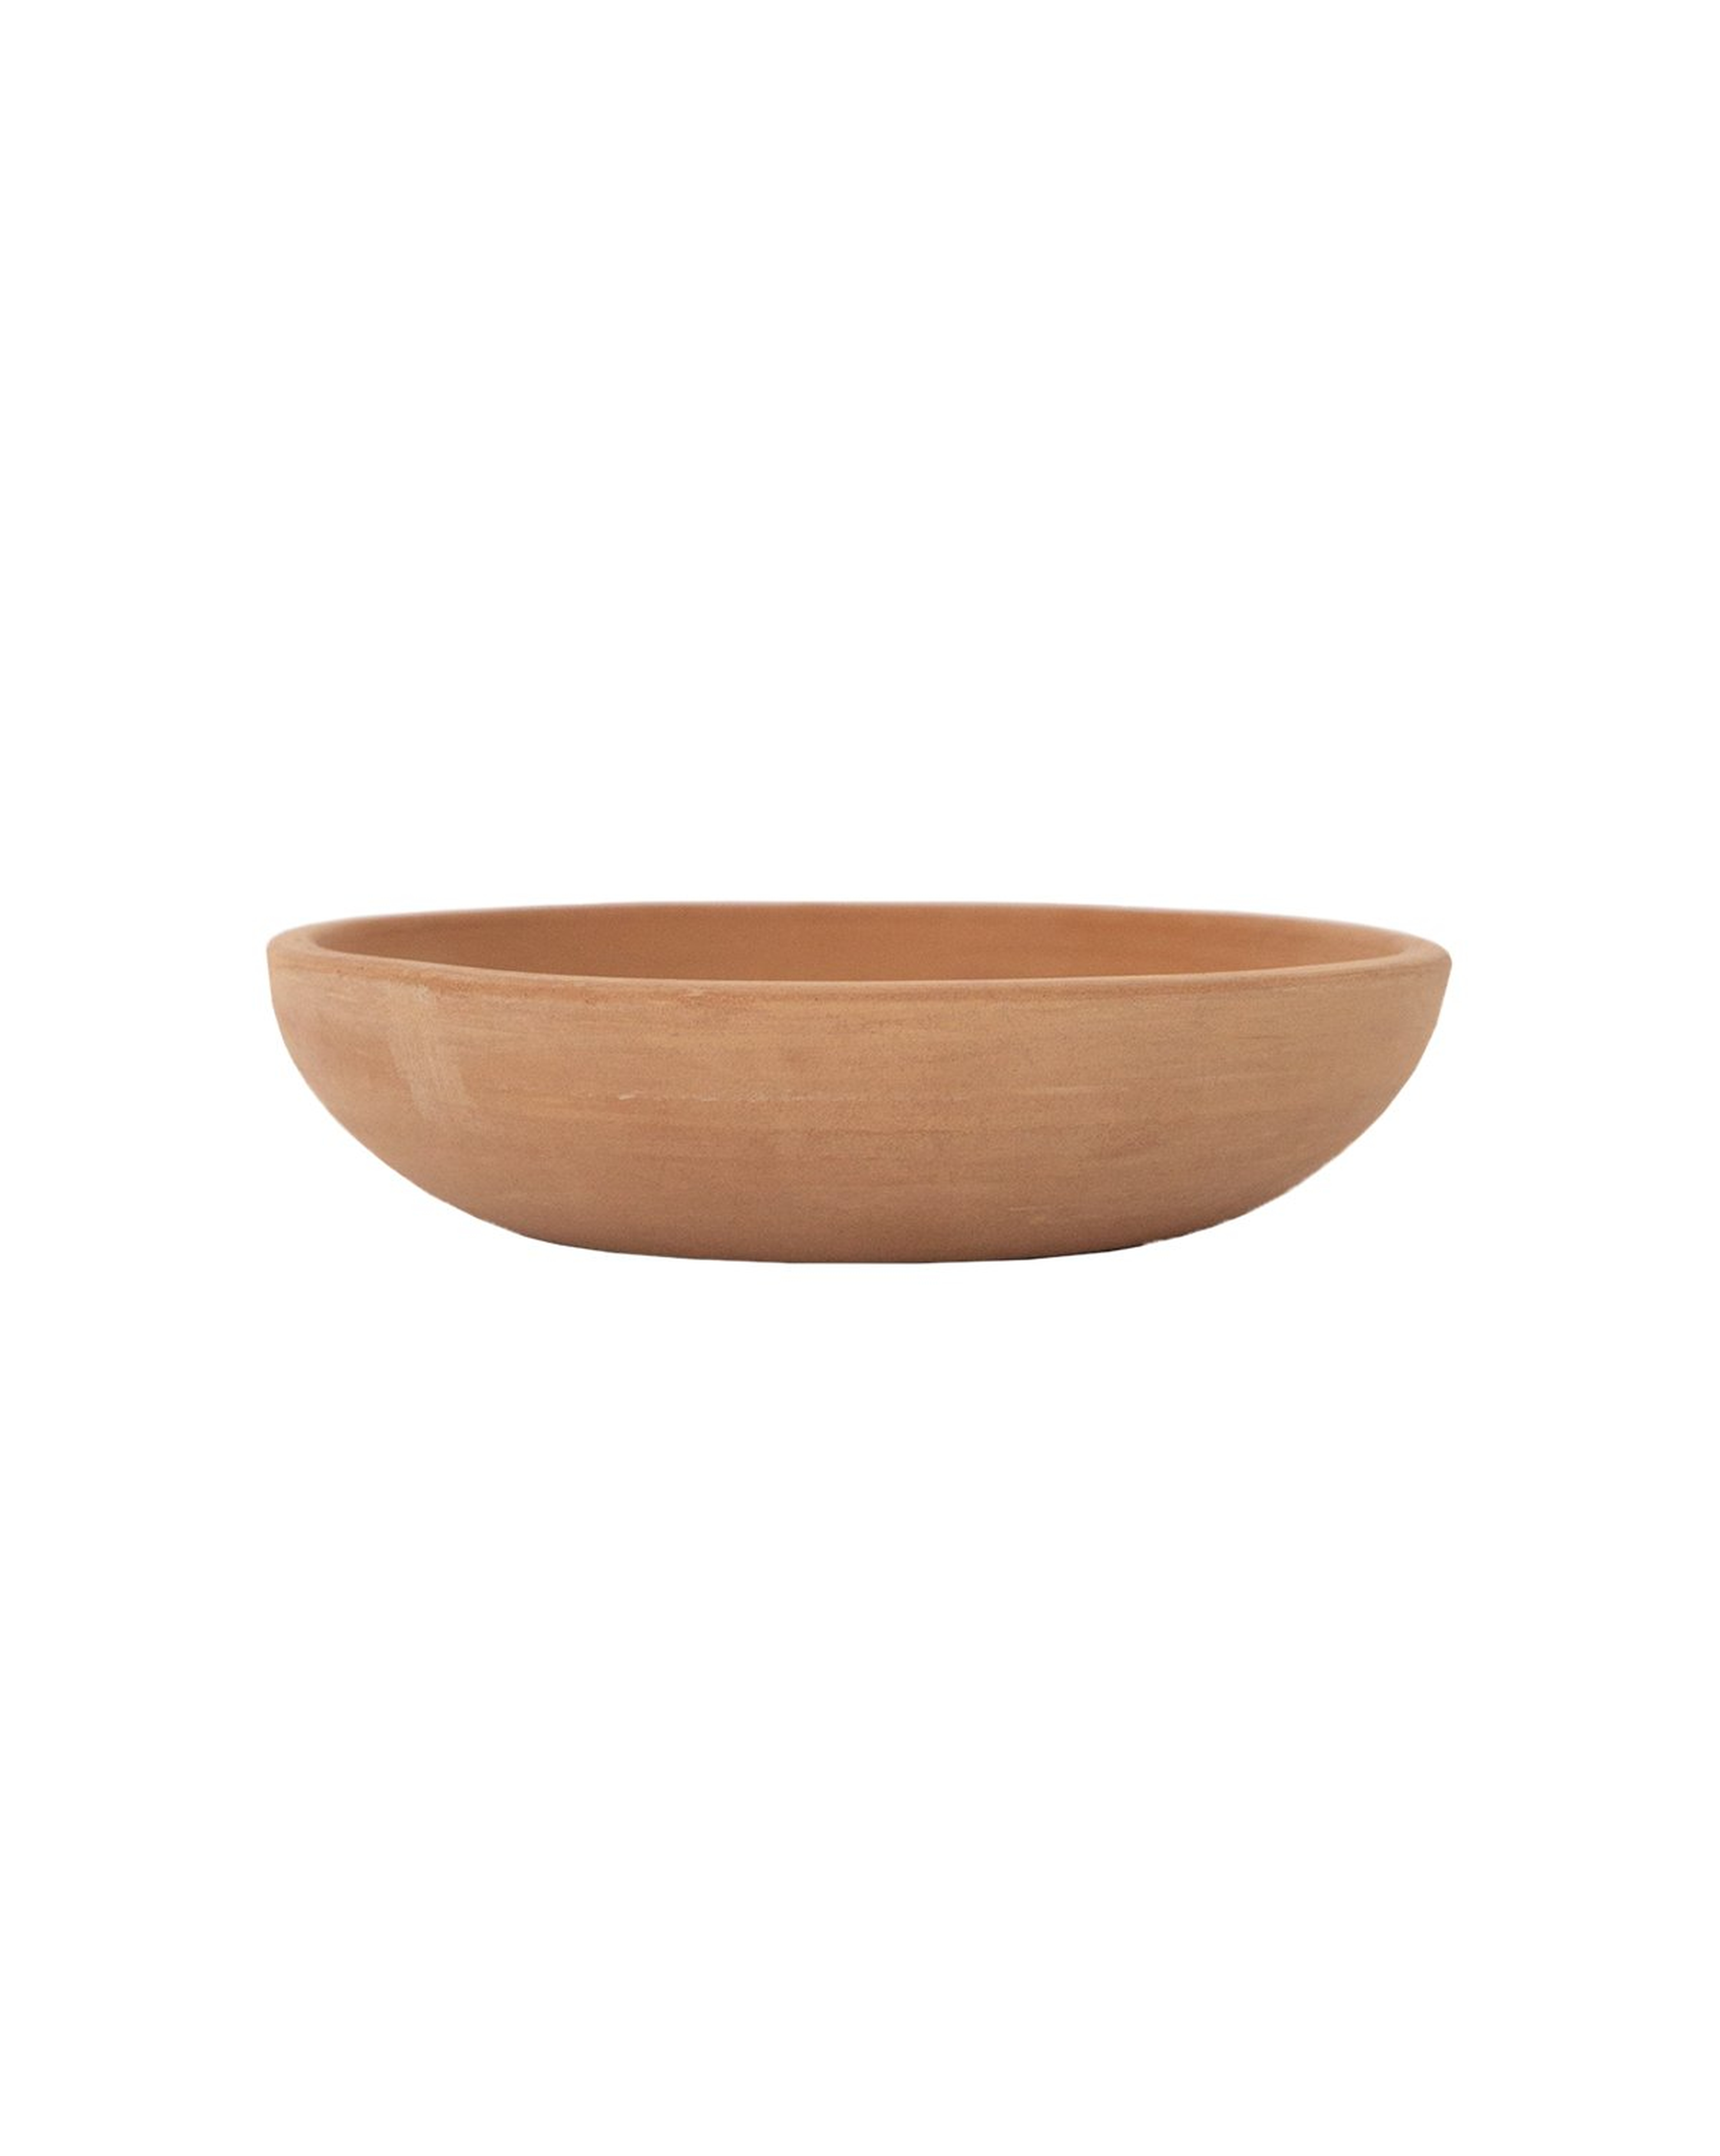 LOW TERRACOTTA BOWL - LARGE - McGee & Co.